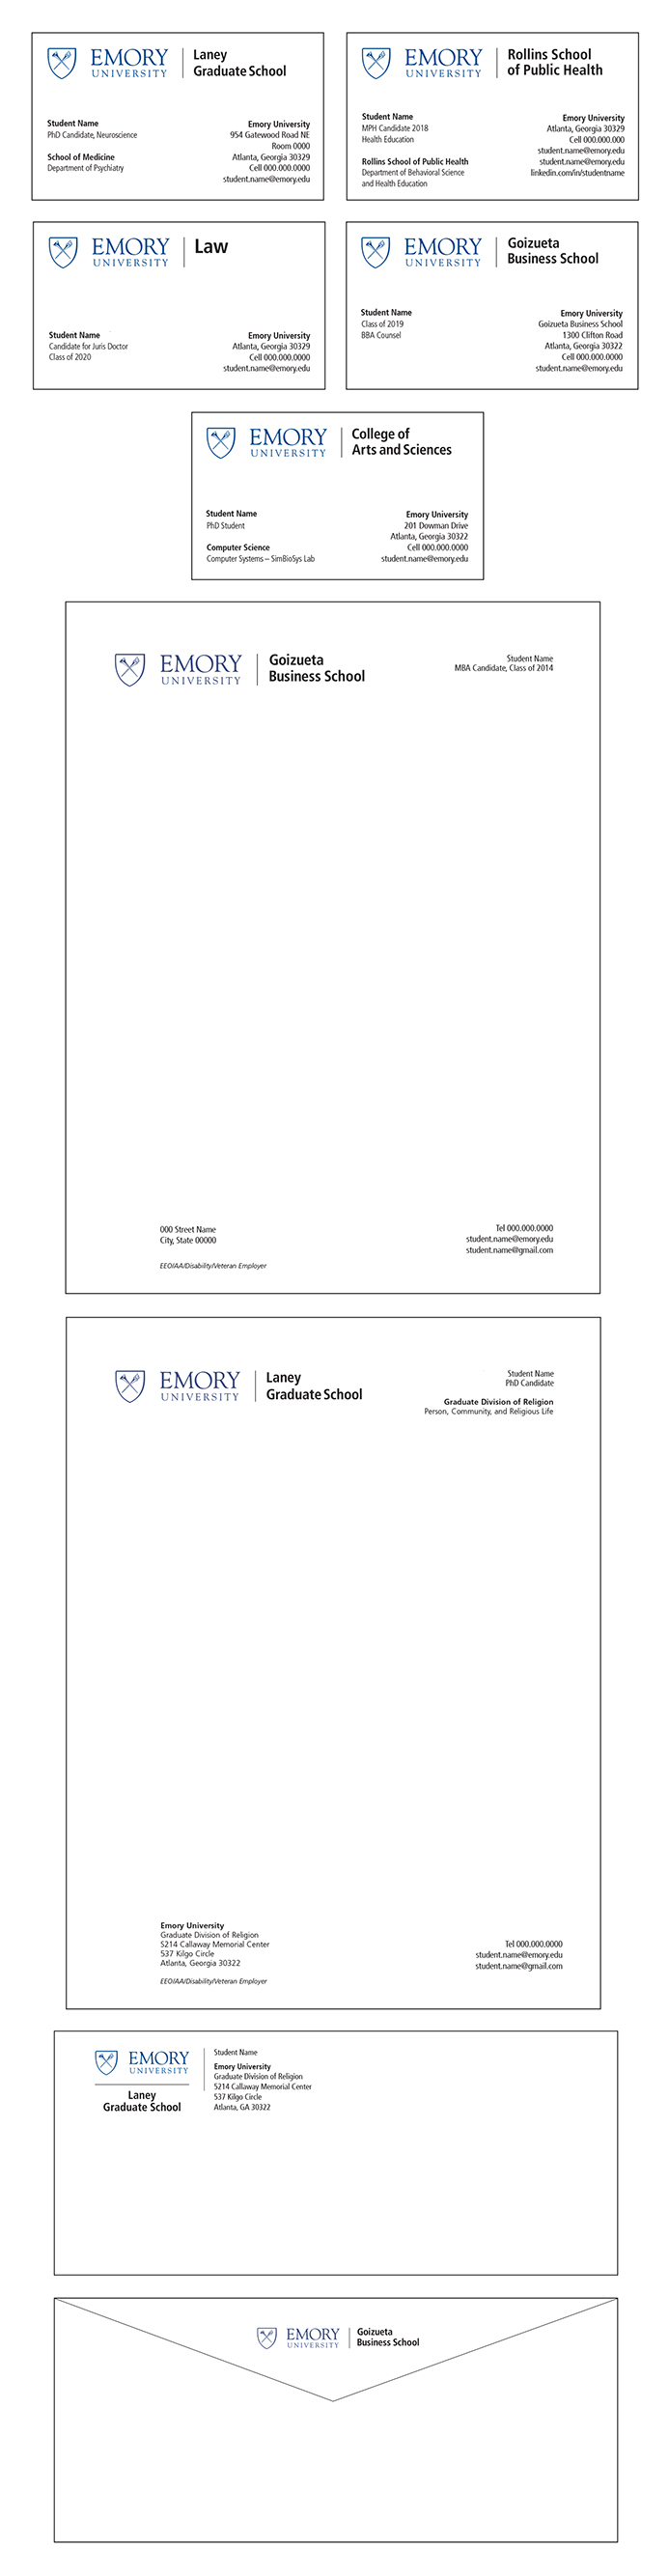 examples of Emory student organization stationery